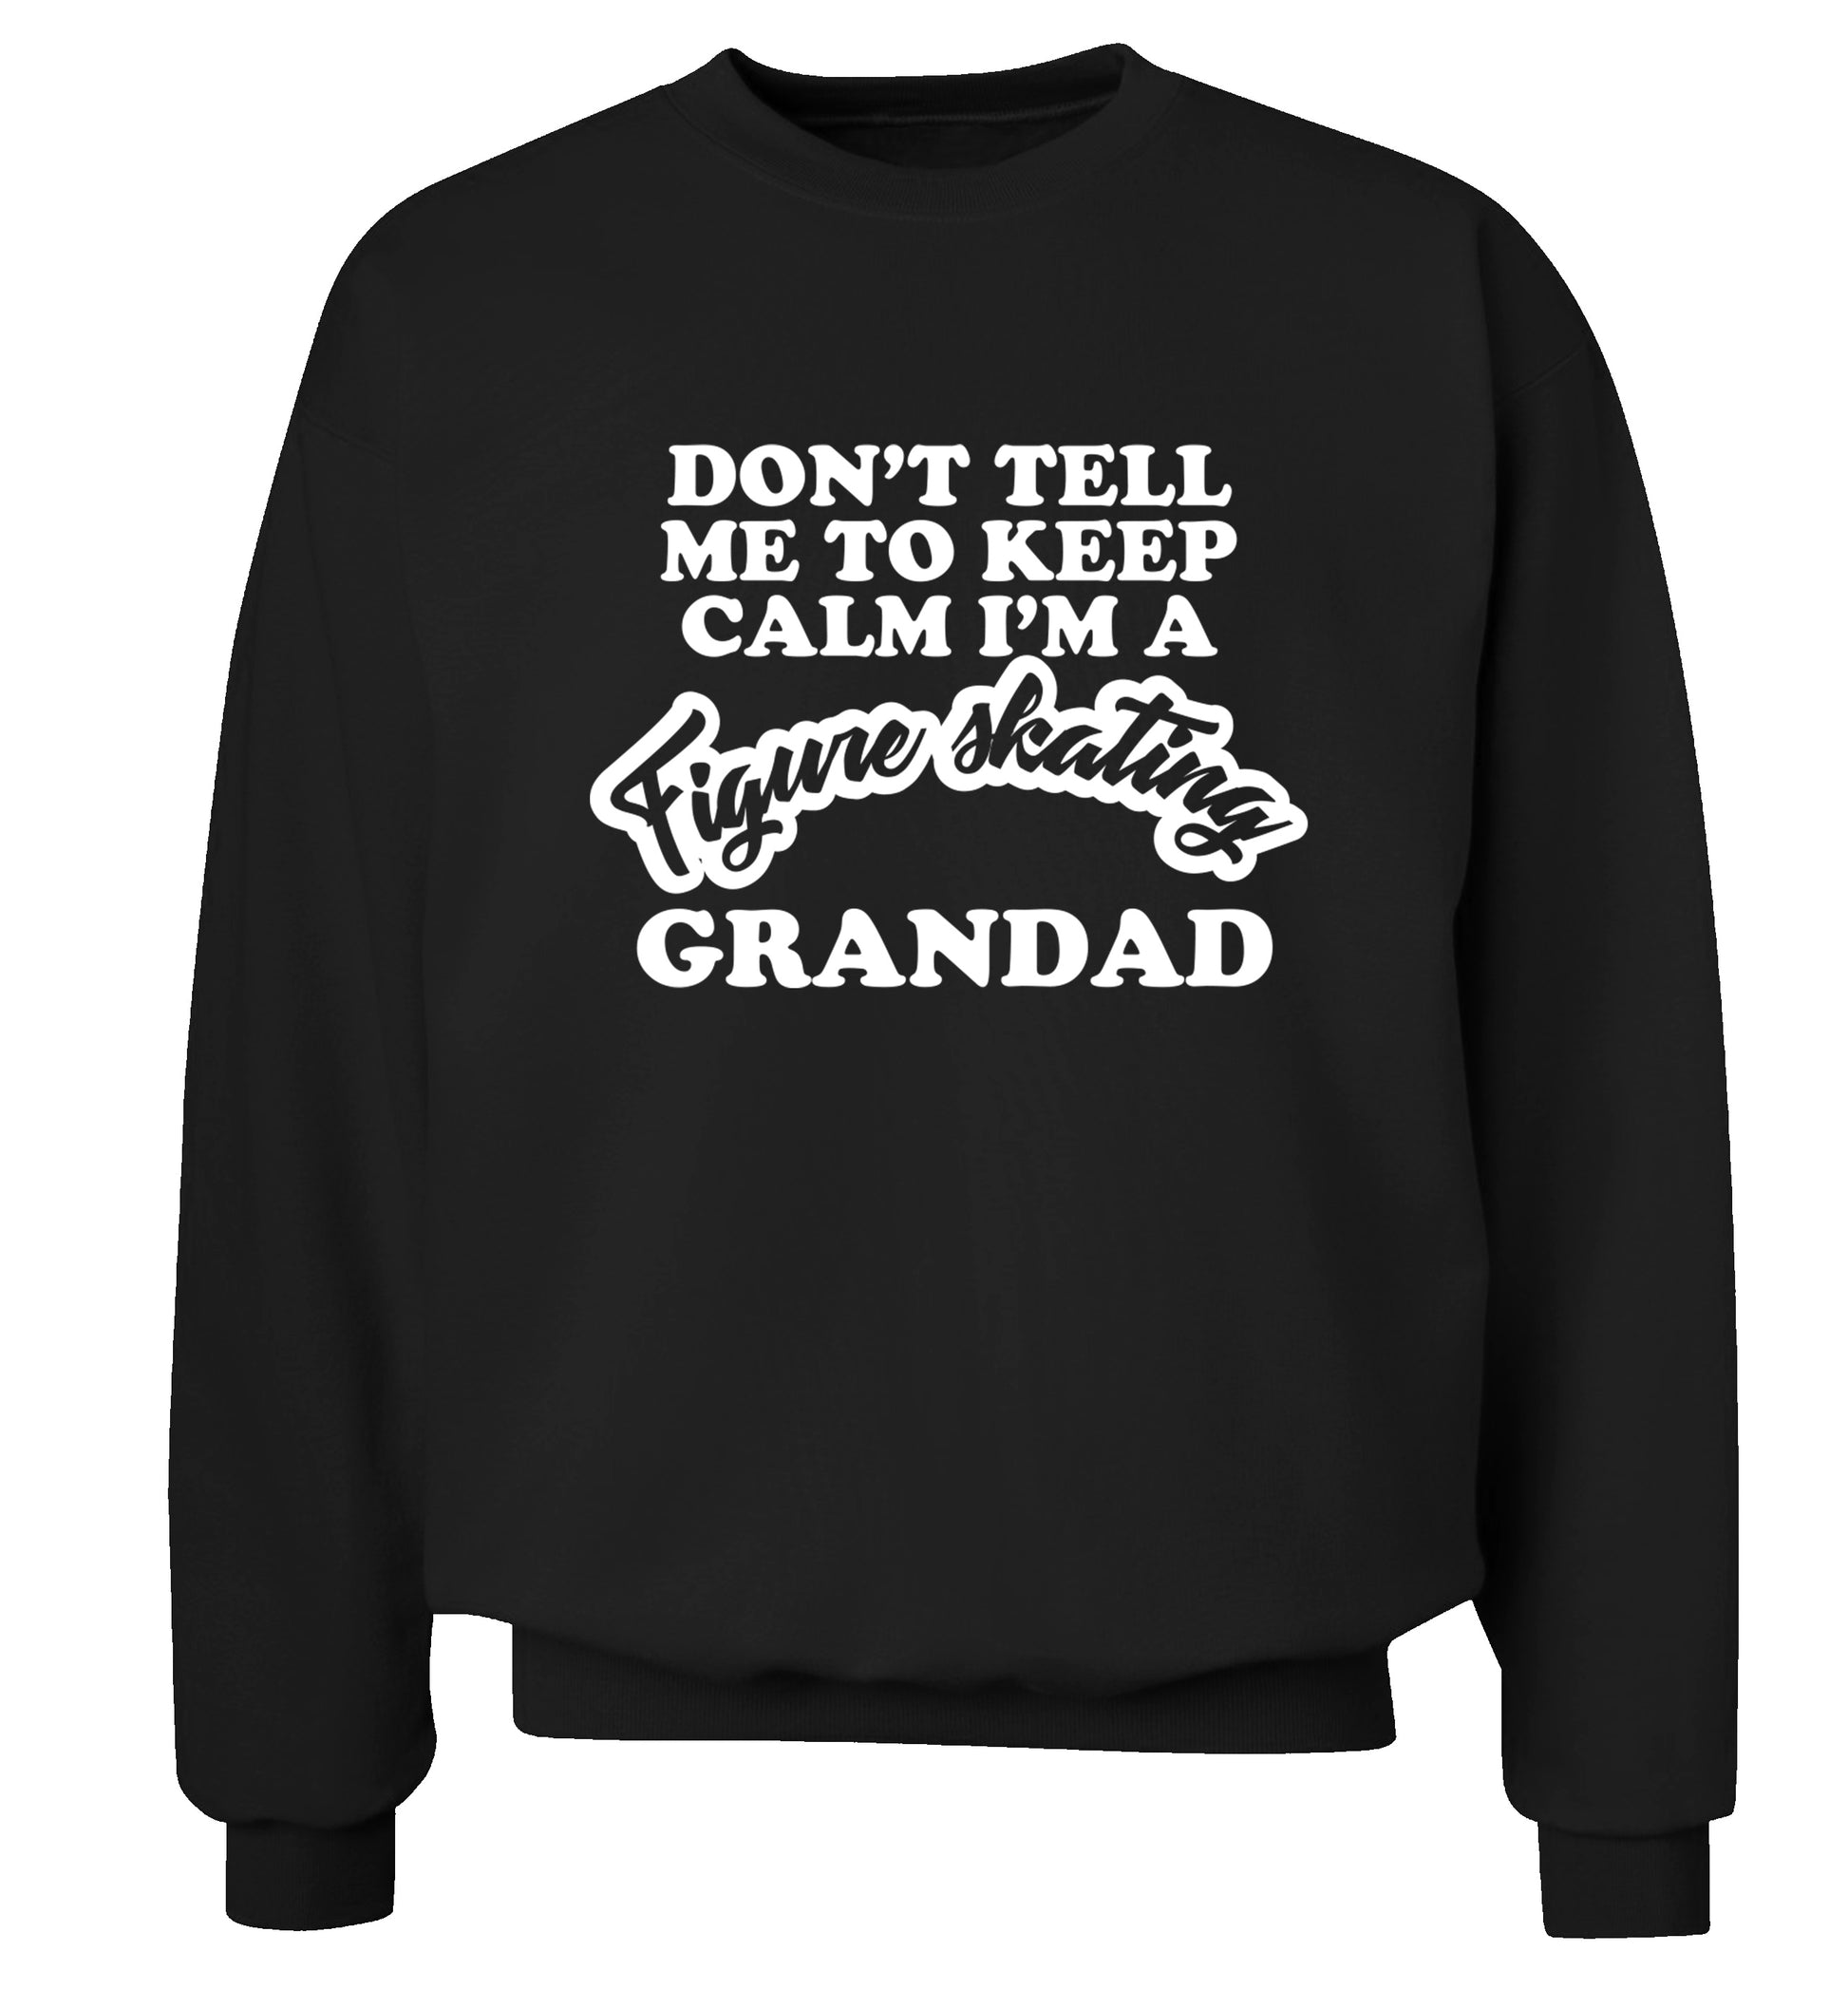 Don't tell me to keep calm I'm a figure skating grandad Adult's unisexblack Sweater 2XL